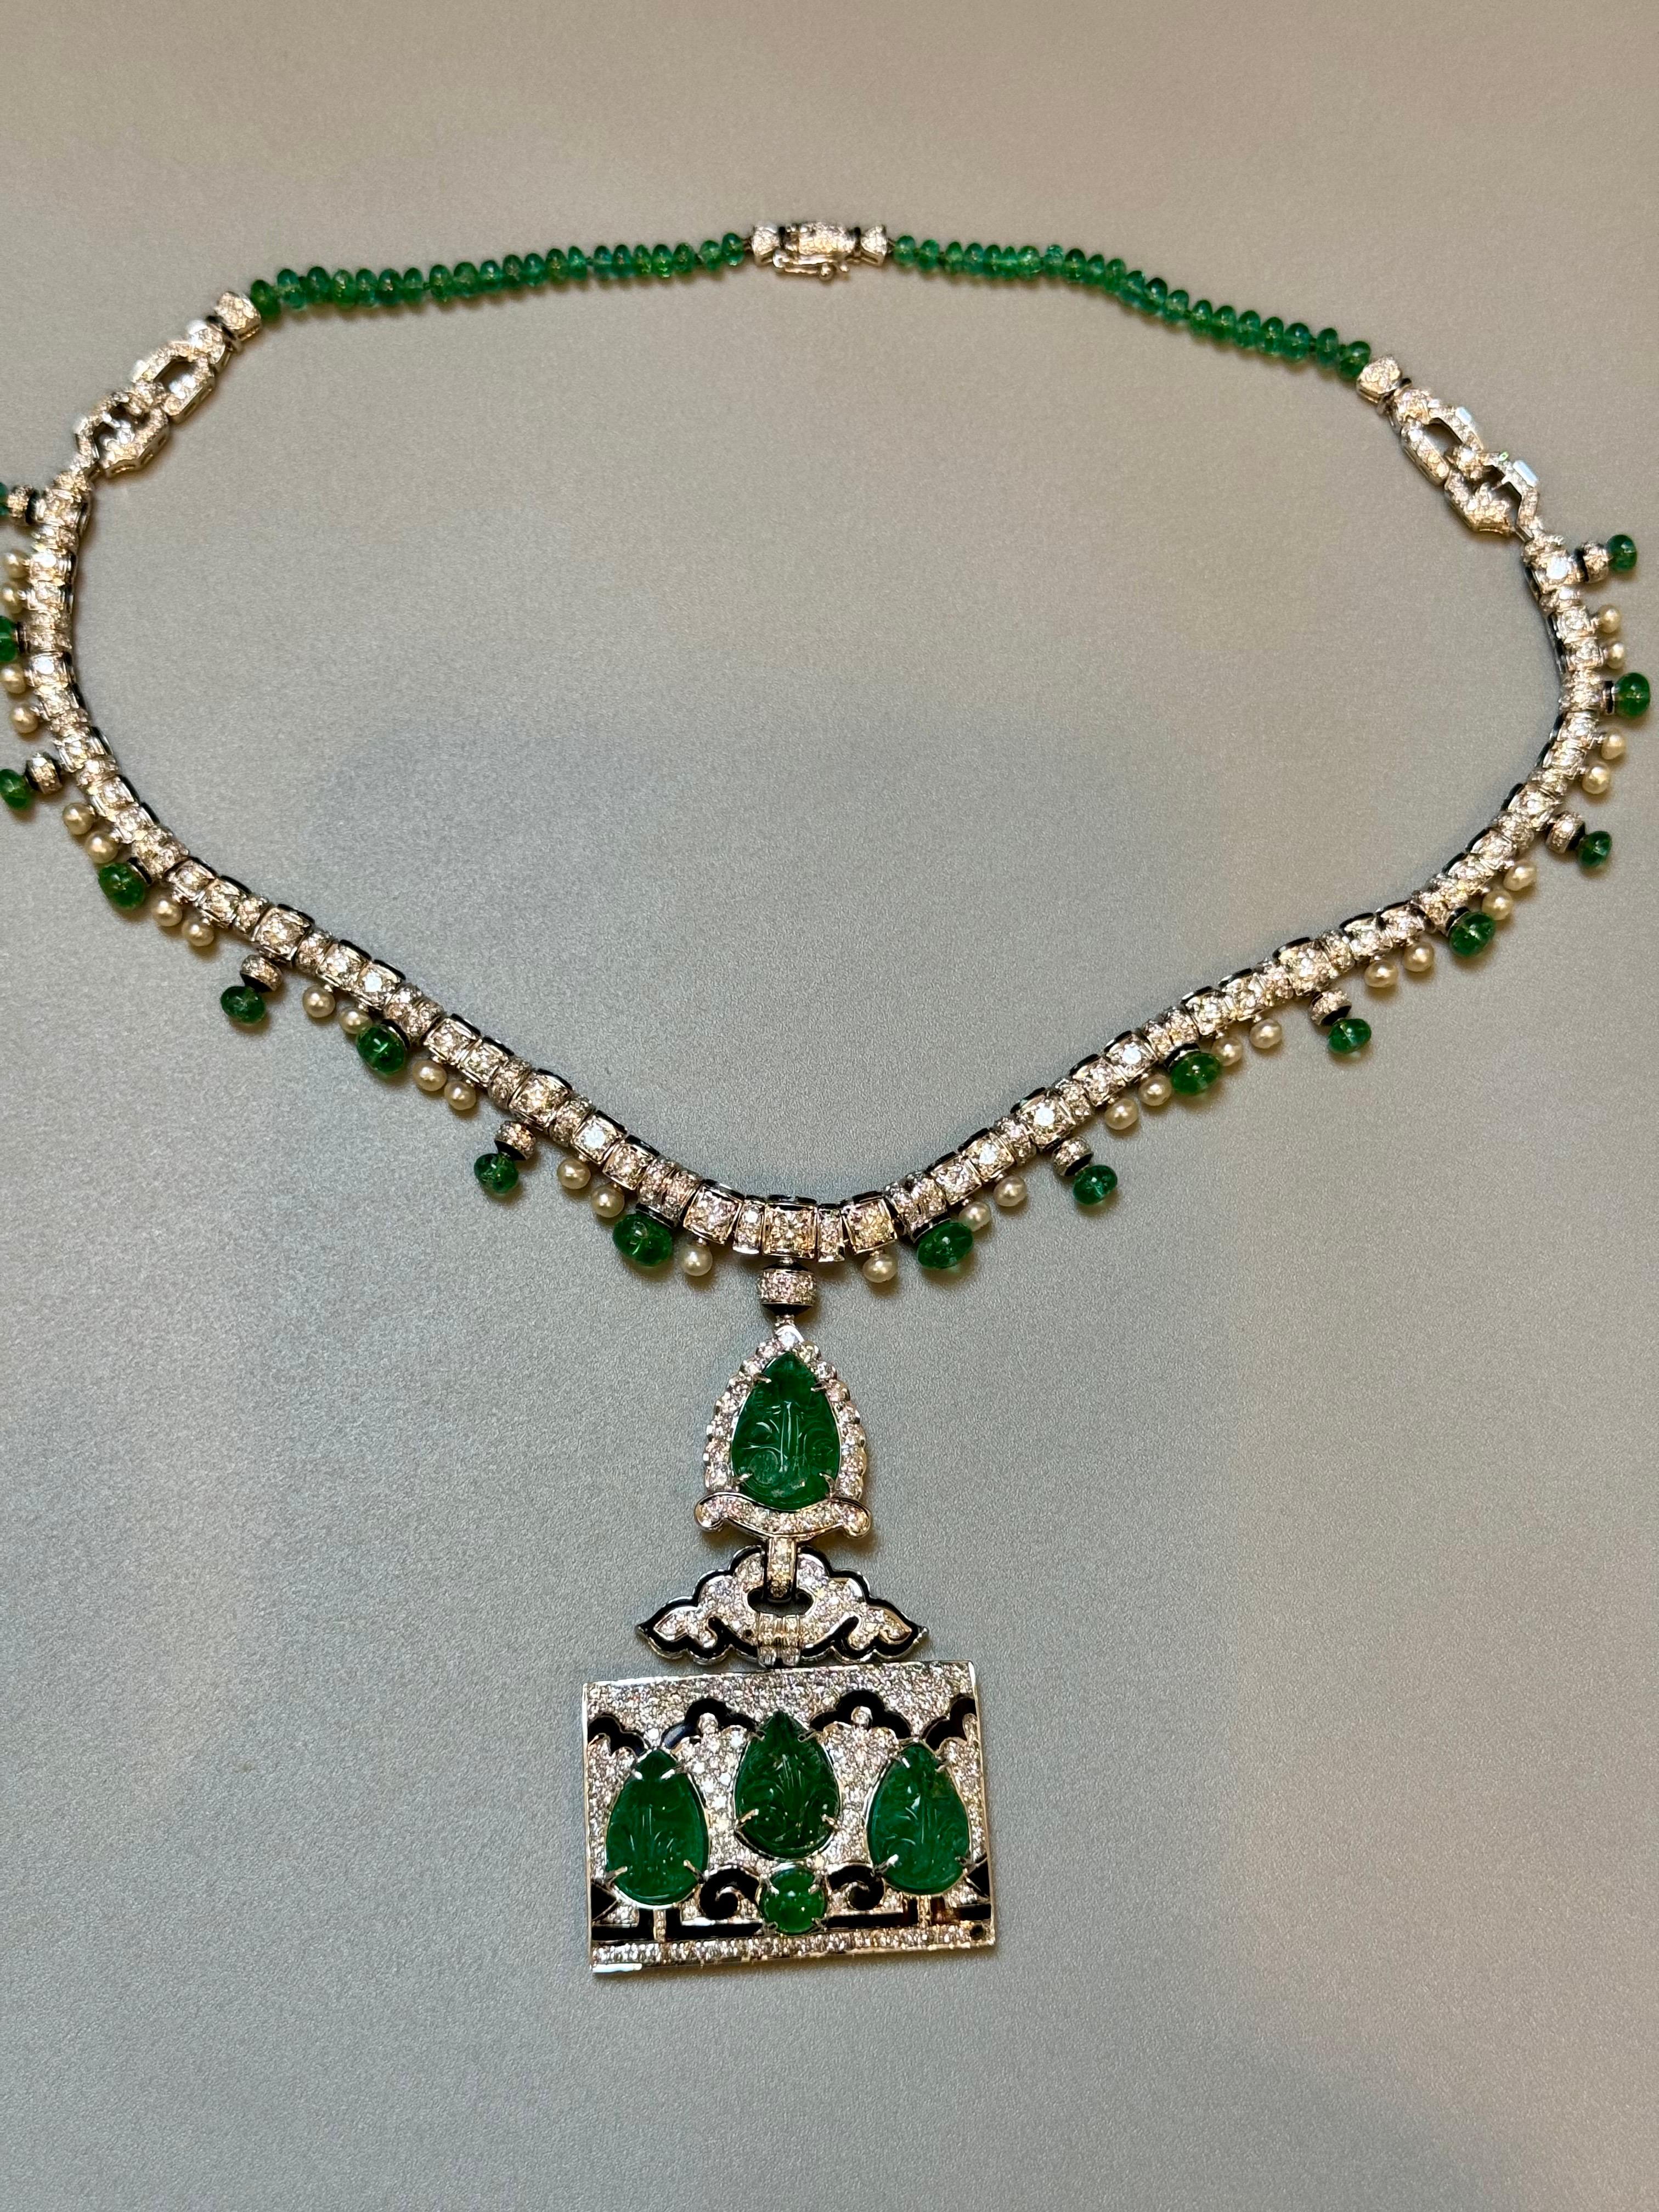 25 Ct Natural Carved Emerald & 10 Ct Diamond Art Deco  18 KW Gold Necklace For Sale 3